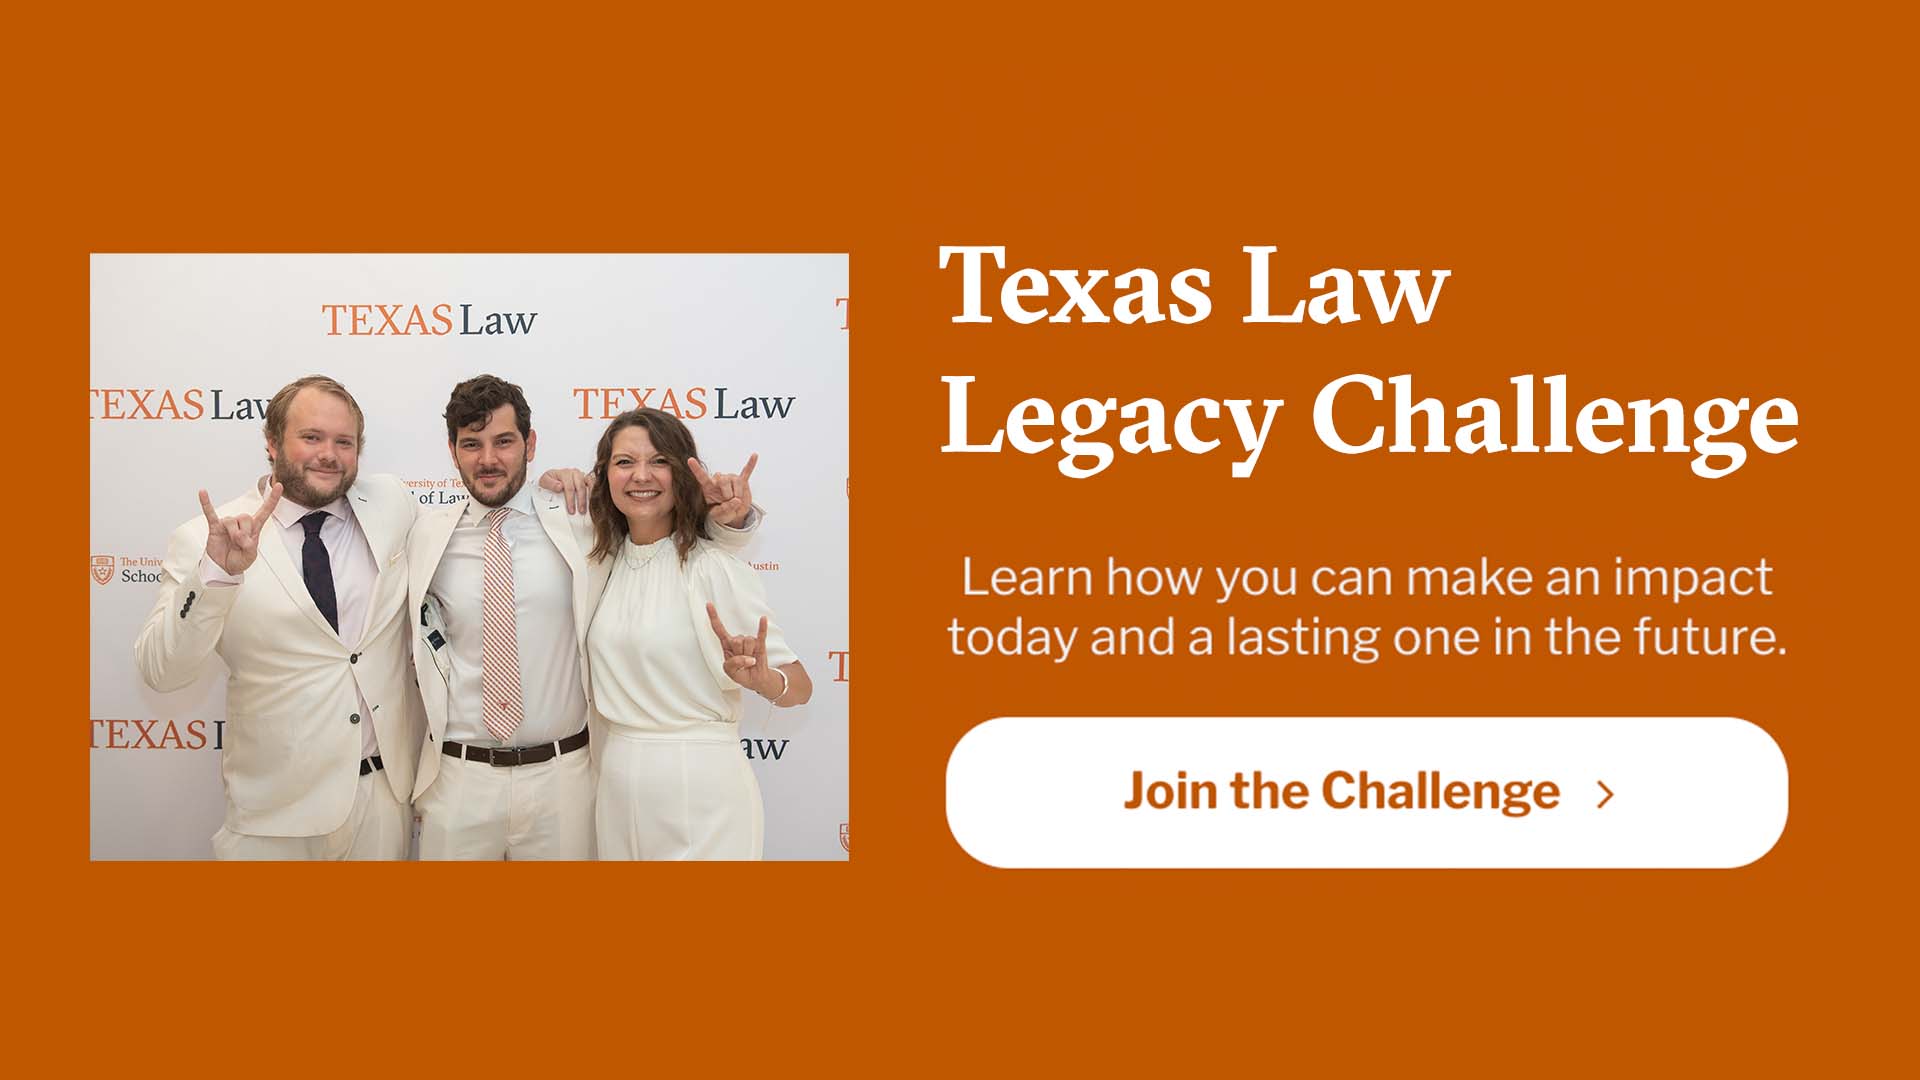 Texas Law Legacy Challenge - Learn how you can make an impact today and a lasting one in the future. Join the Challenge